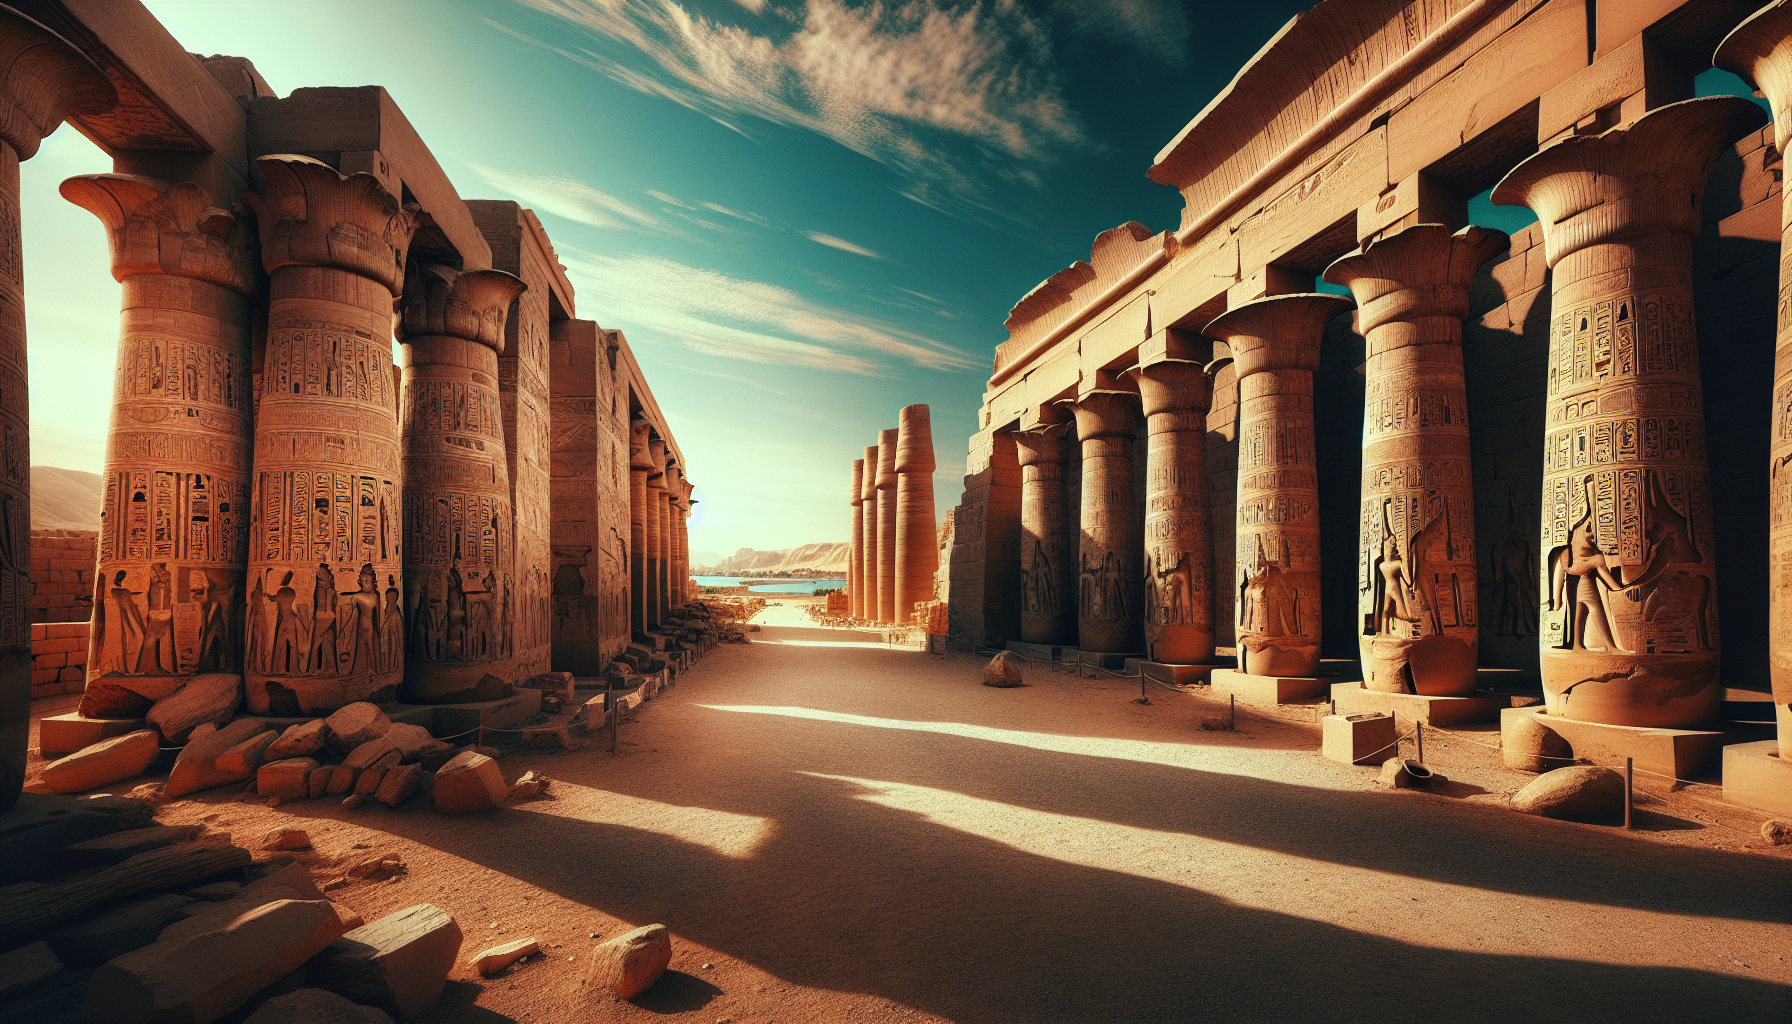 unravel the astonishing secrets of the karnak temple and delve into its mind-blowing mysteries with our exclusive guide. explore the hidden wonders of this ancient marvel and uncover its fascinating history and significance.